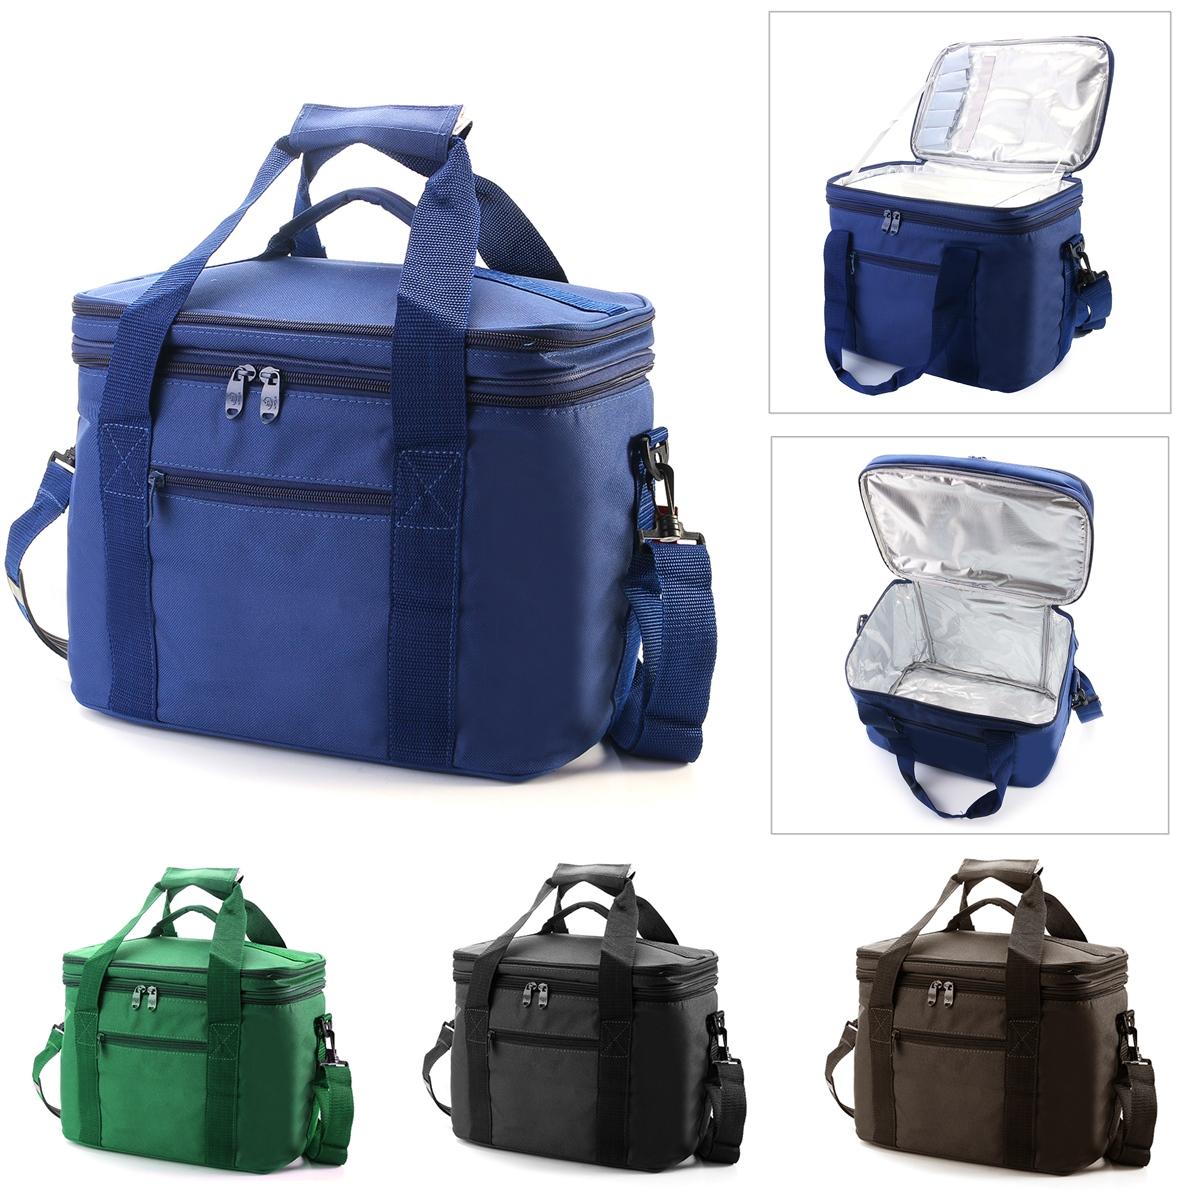 33x20x27cm?Oxford?Double?layer?Ge?soleerde?Lunch Bag Grote Capaciteit Reis Outdoor Picnic Tote Bag